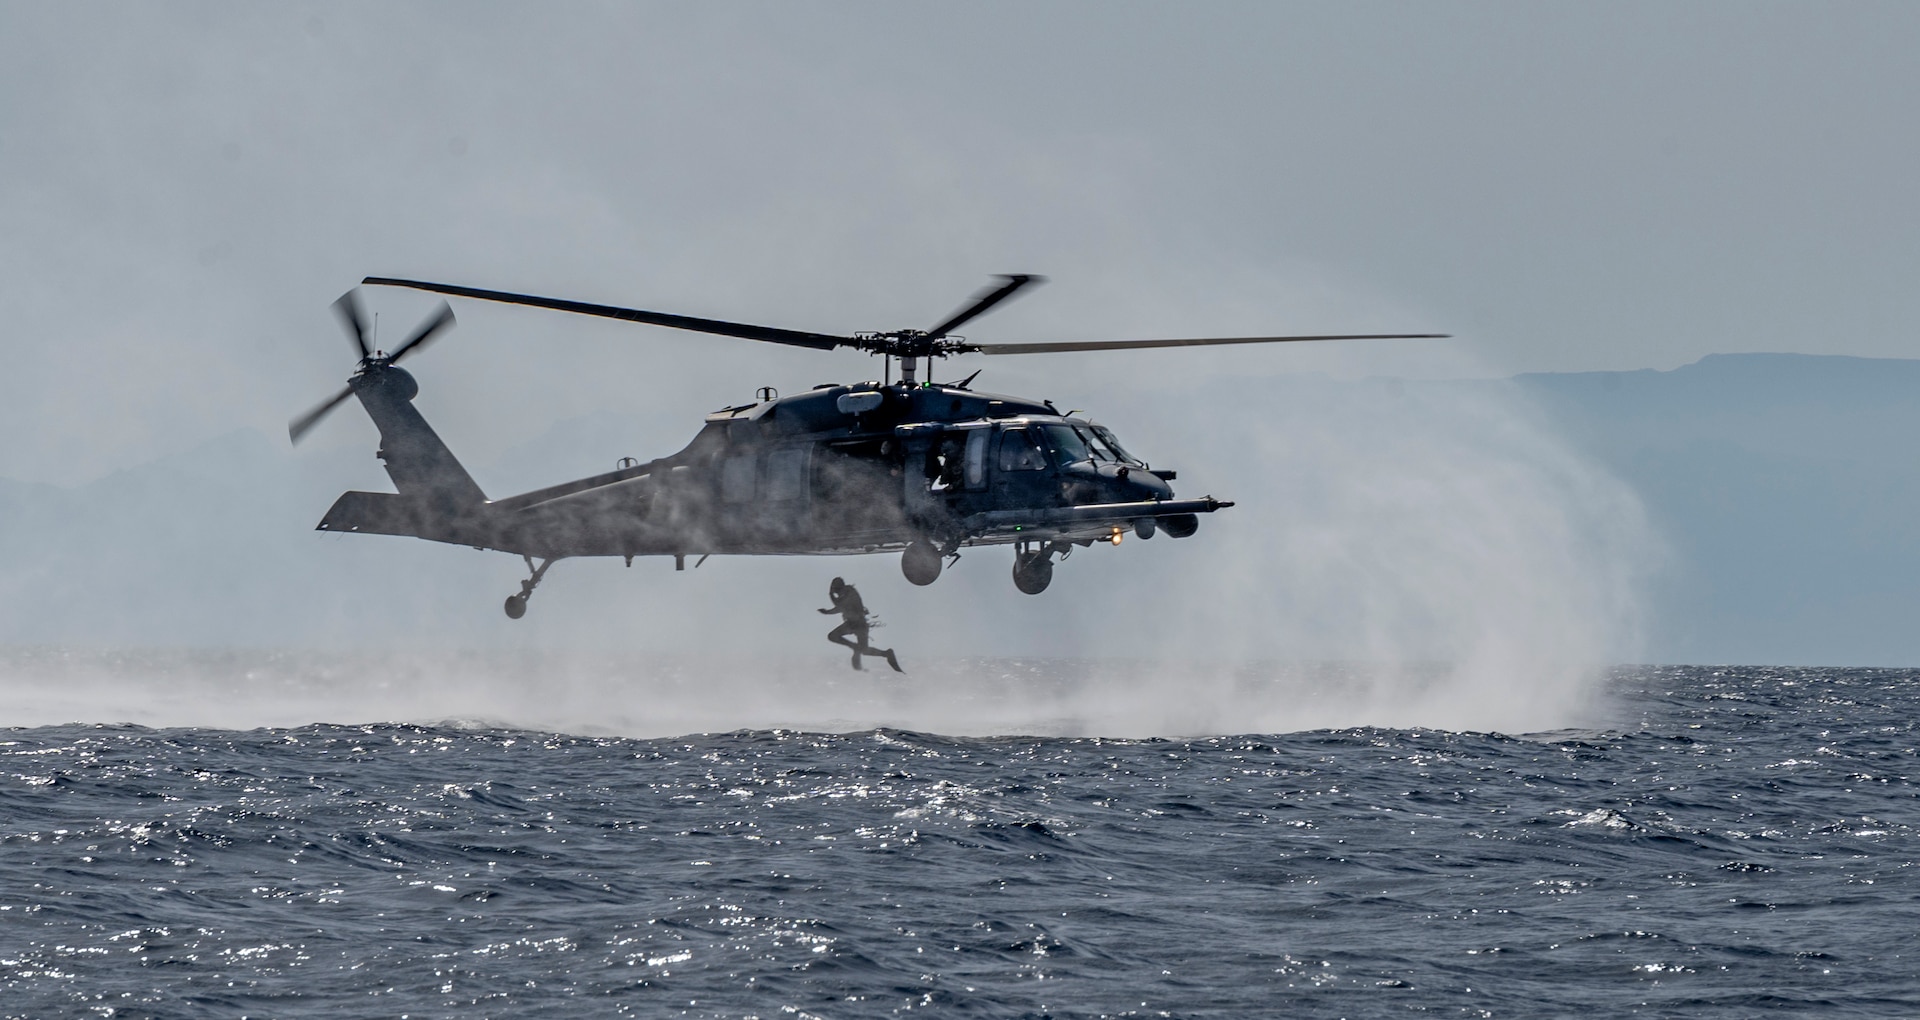 “That Others May Live”: Partner Nation integrates with U.S. Rescue forces for joint training